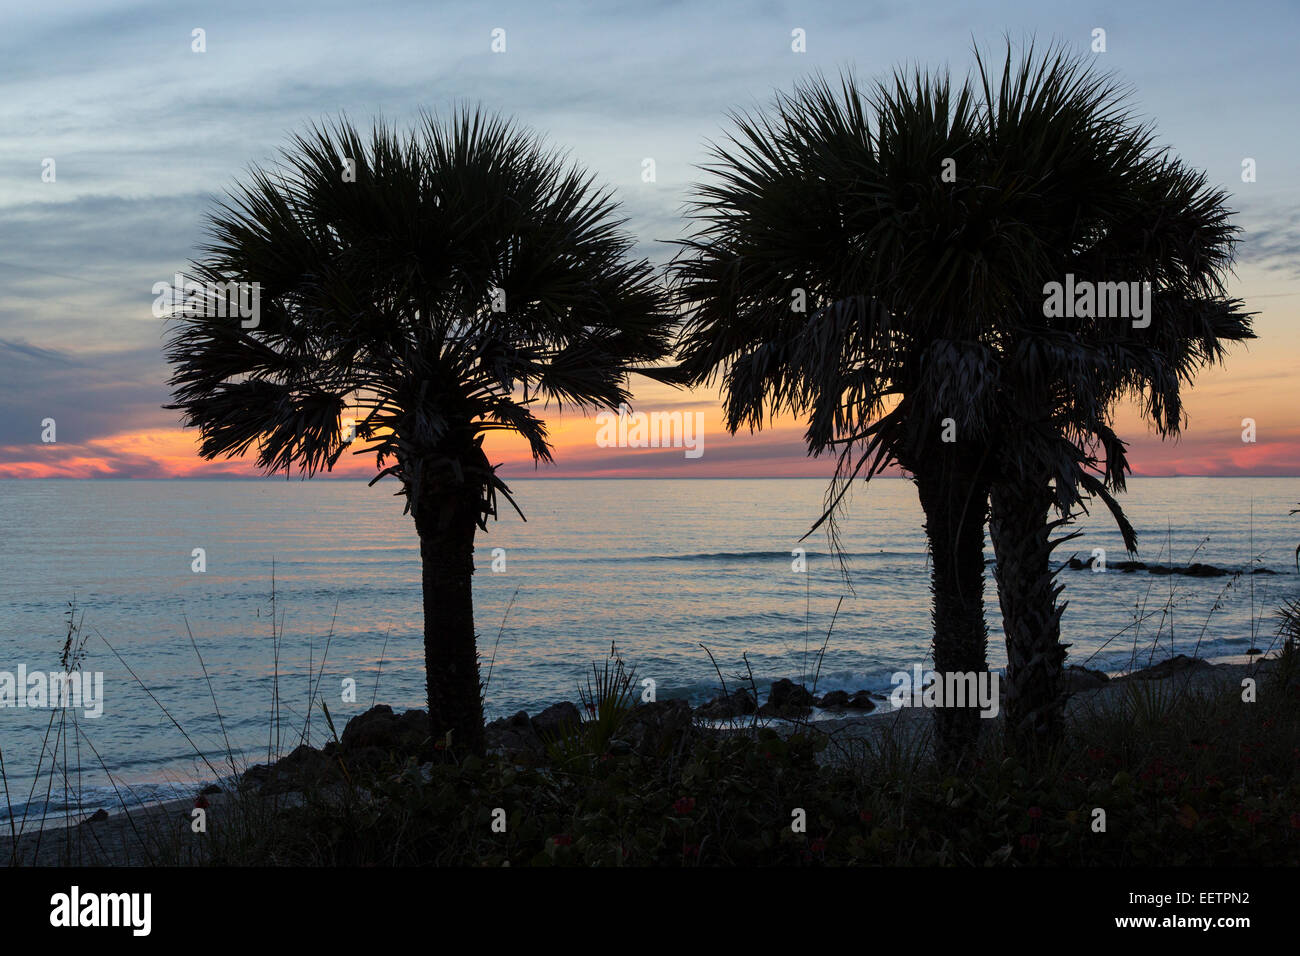 Palm tress silhouetted aganist sunset sky at Caspersen Beach on the Gulf of Mexico in Venice Florida Stock Photo